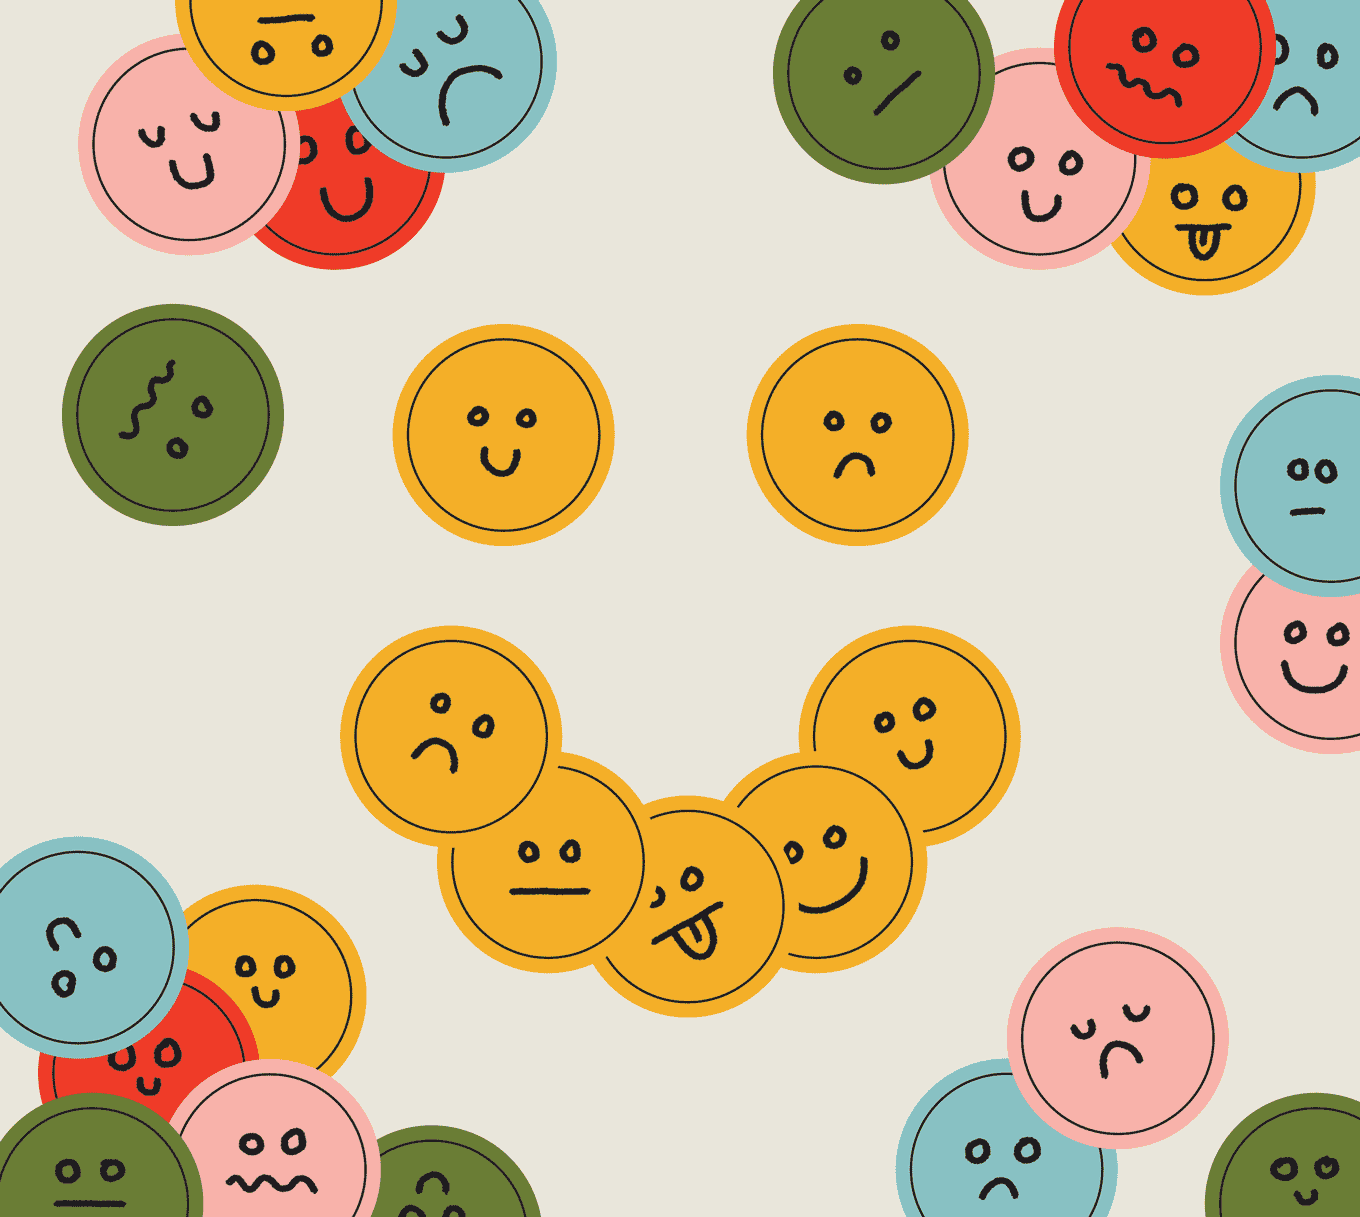 Big smiley face made up of lots of other faces of mixed emotions